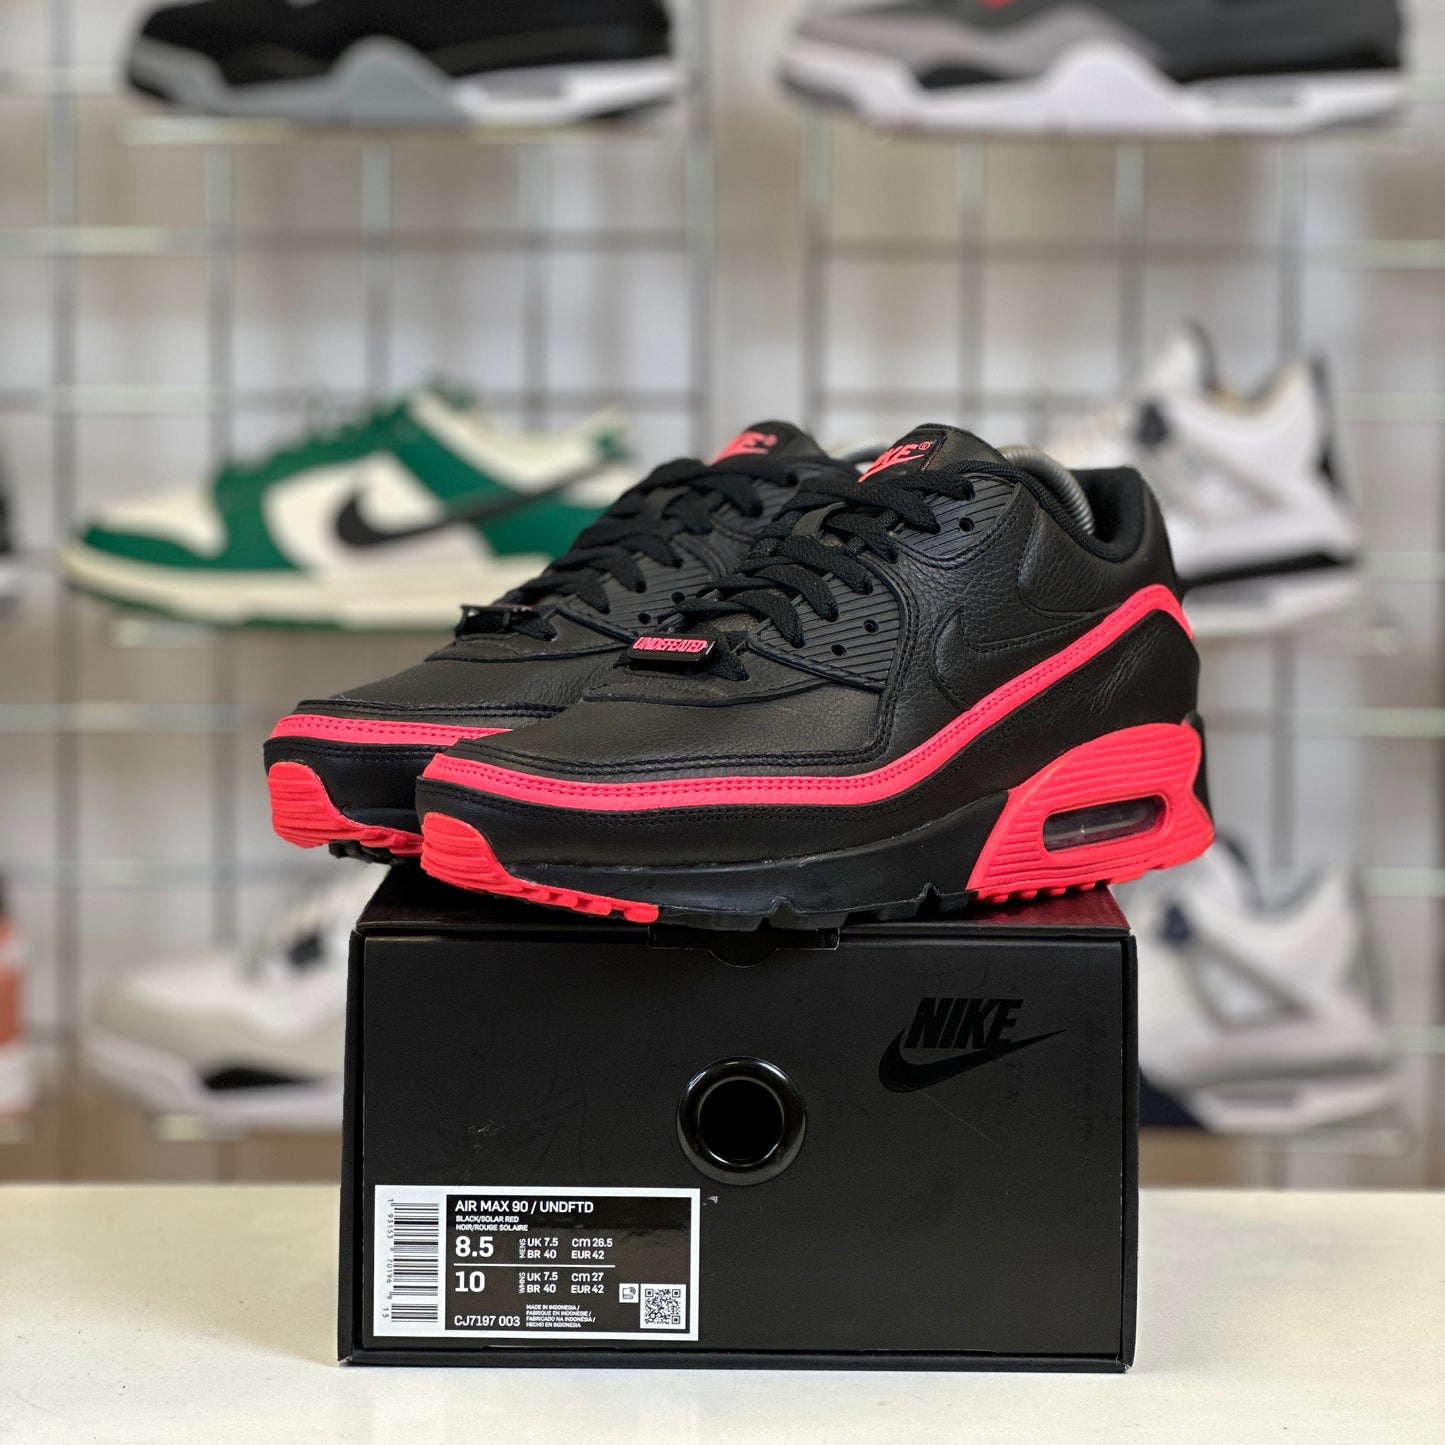 Nike Air Max 90 Undefeated 'Black Solar Red' UK7.5